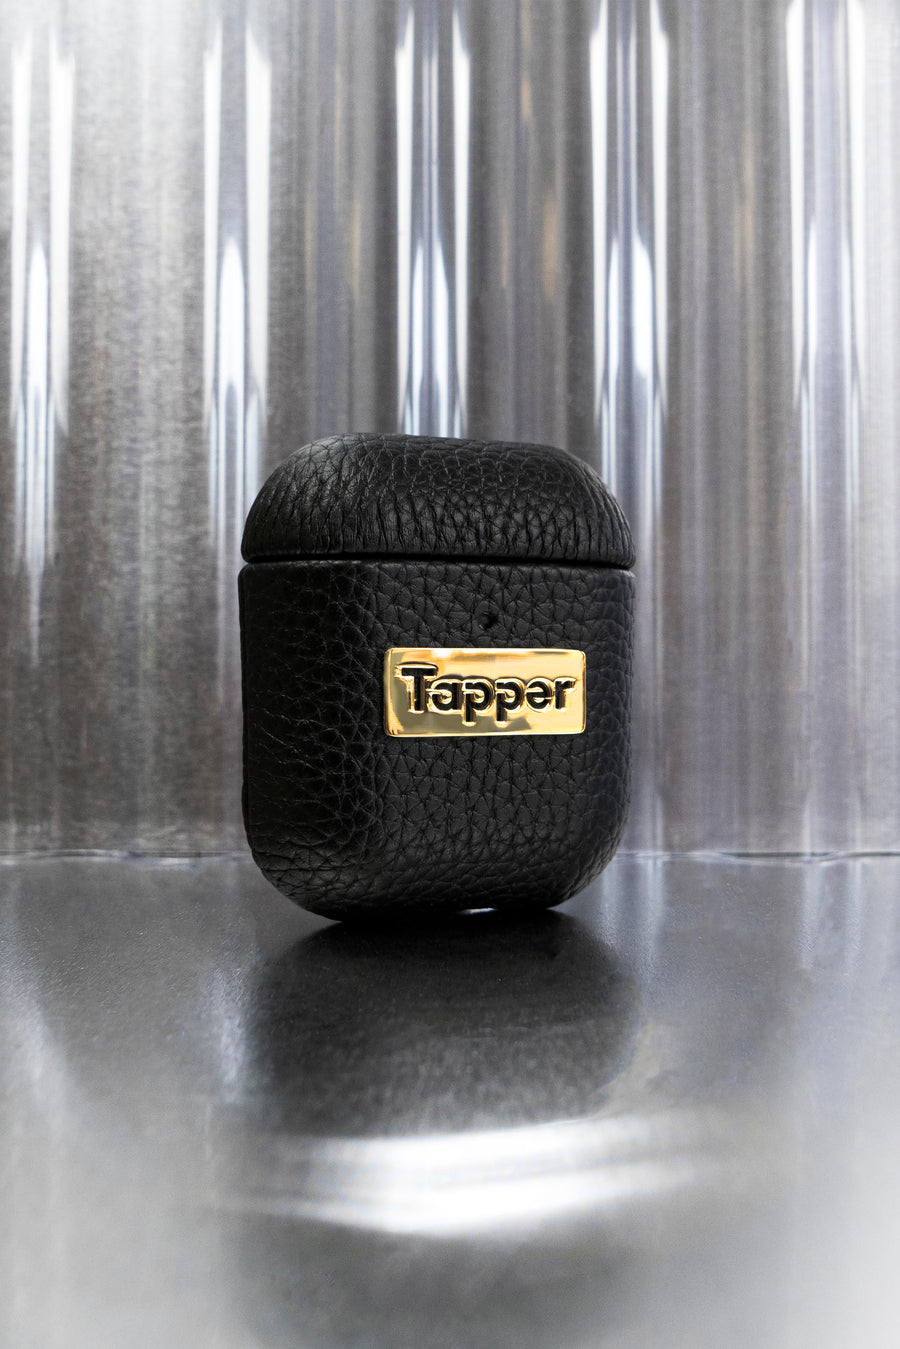 Tapper's luxurious black genuine cow leather AirPods case protects and elevates the look of your AirPods. The luxurious, protective case for AirPods with a metal logo plate in real 18k gold plating steps up your AirPods game. The next must-have high end protective Apple AirPods accessory in real leather and precious metals. Compatible with AirPods (1st and 2nd generation). Designed in Sweden by Tapper. Free Express Shipping at gettapper.com